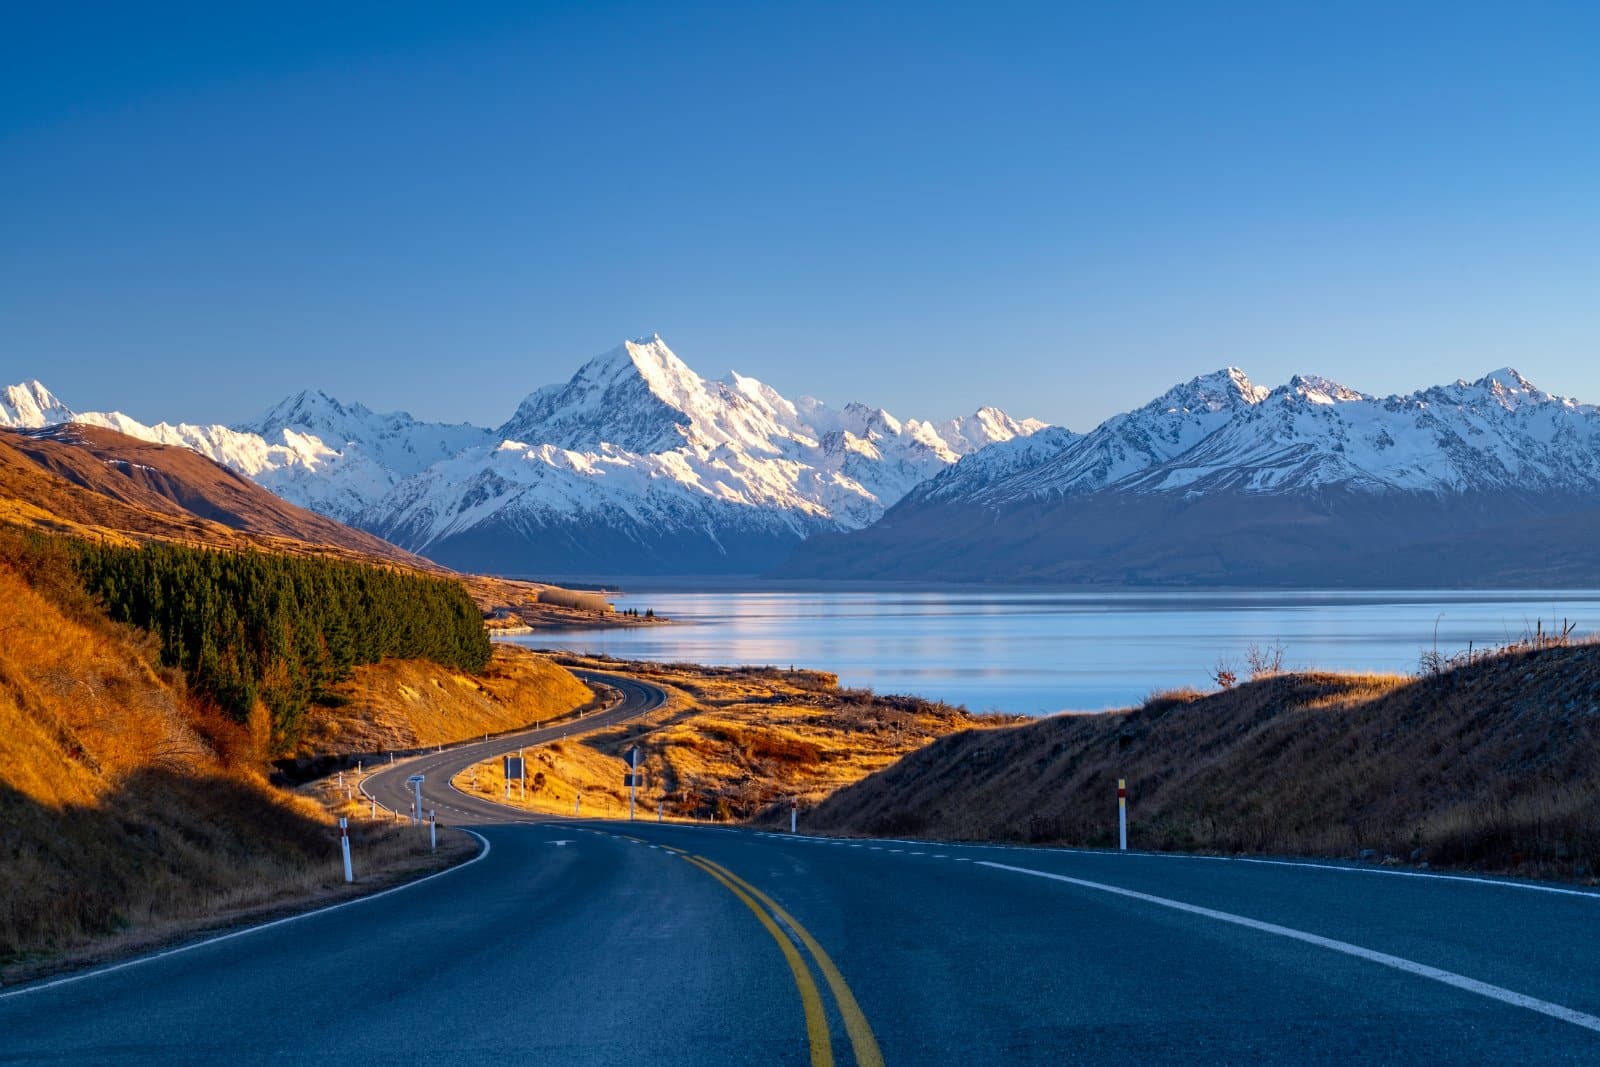 <p class="wp-caption-text">Image Credit: Shutterstock / Nur Ismail Photography</p>  <p>With its unparalleled natural beauty, New Zealand seeks skilled individuals in agriculture, IT, and healthcare, offering a balanced lifestyle. IT professionals can expect to earn NZD 70,000 to NZD 100,000 in a country where adventure and tranquility coexist.</p>